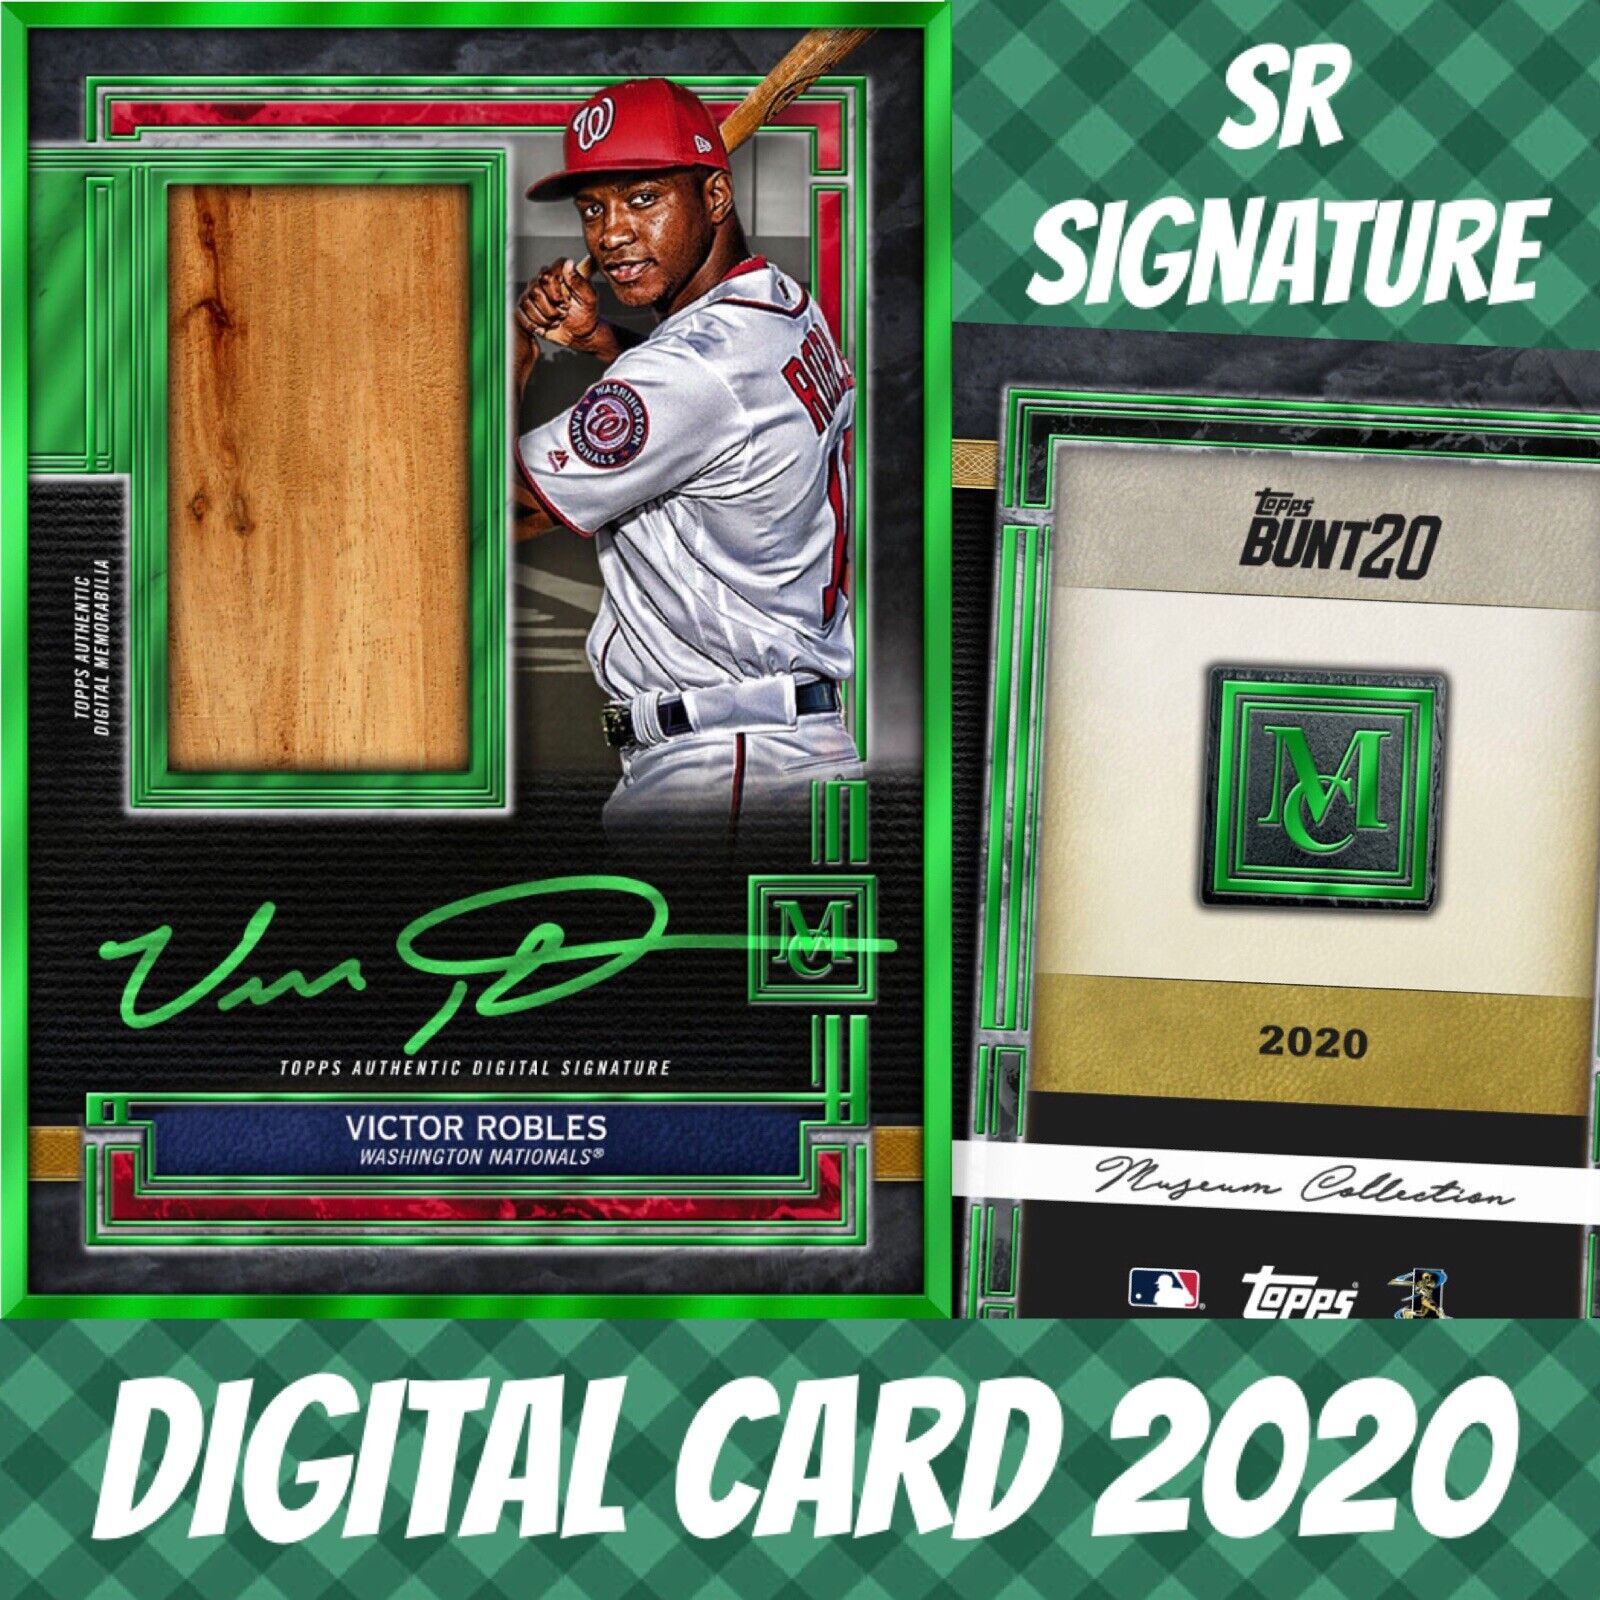 2020 Topps Colorful Digital Victor Robles Museum S/2 Green Signature Relic Digital